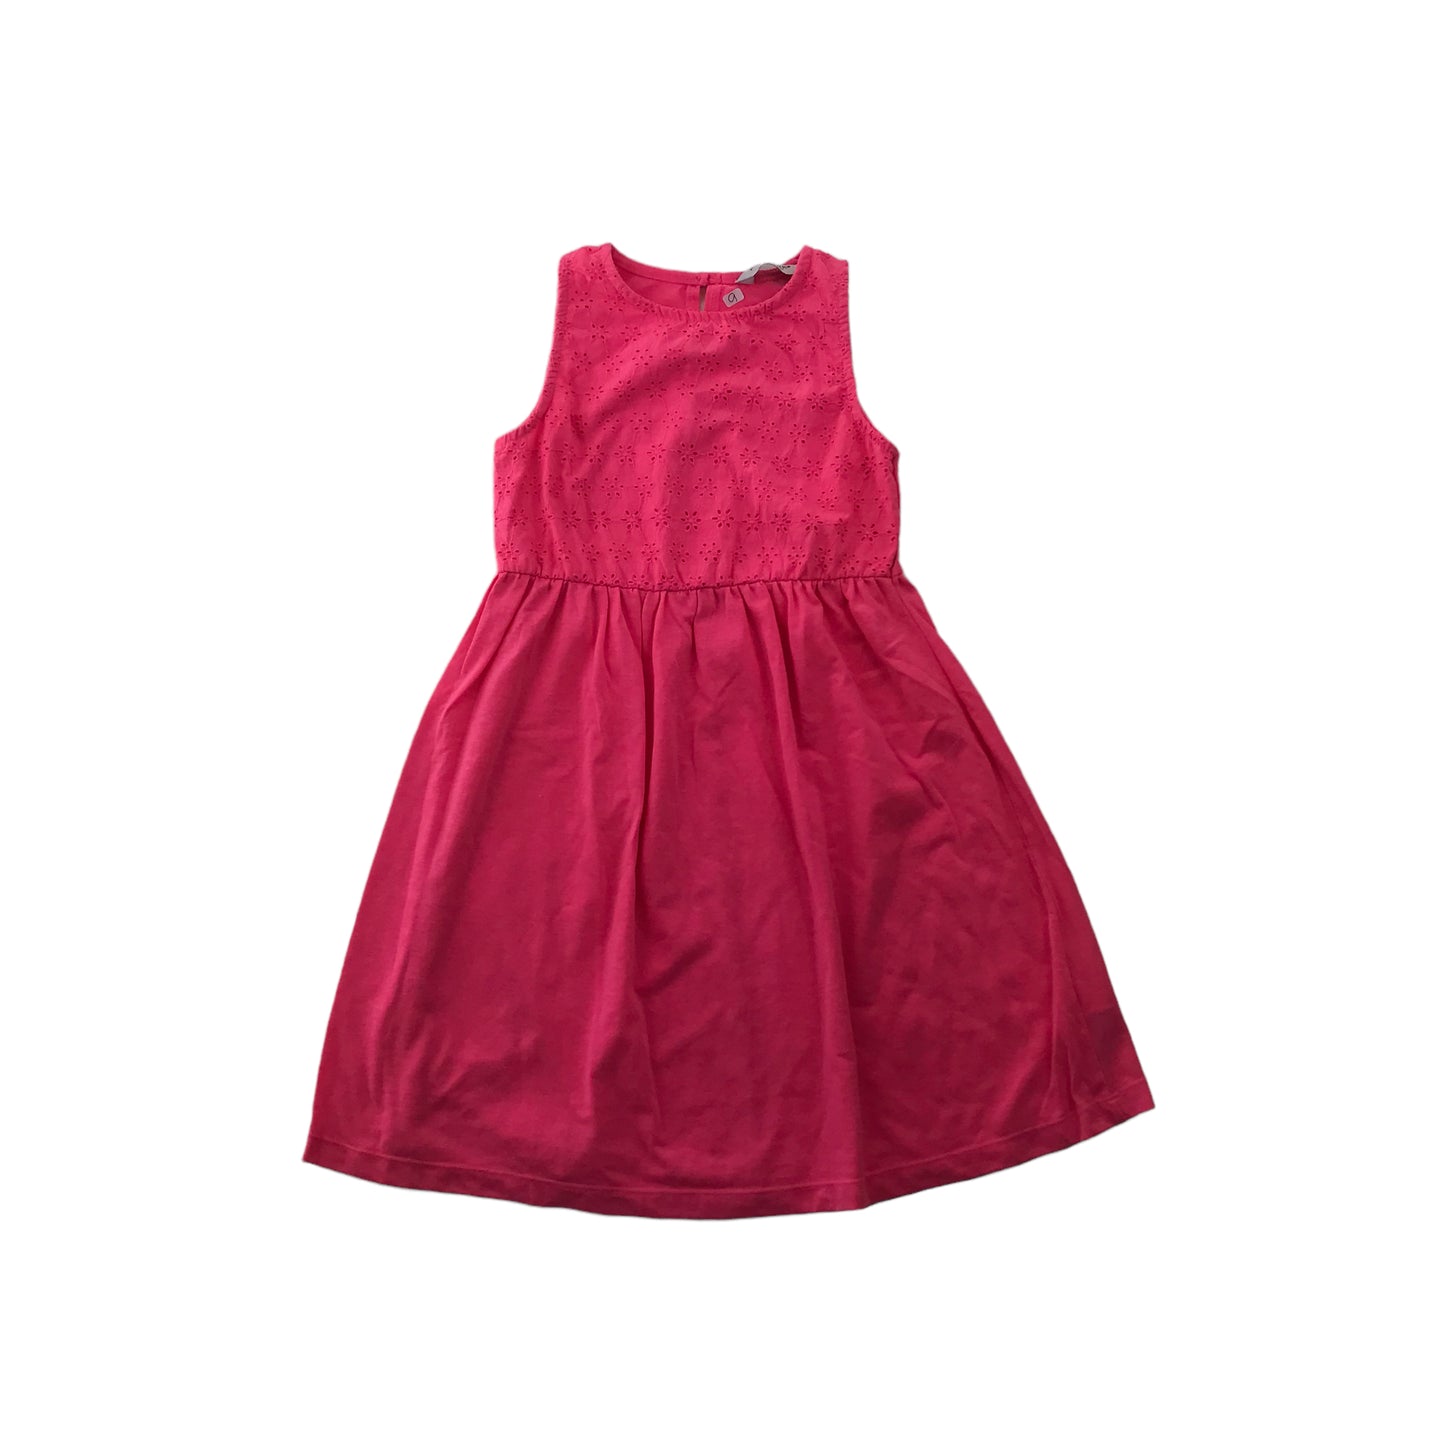 Primark Pink and Yellow Summer Dress Bundle Age 9